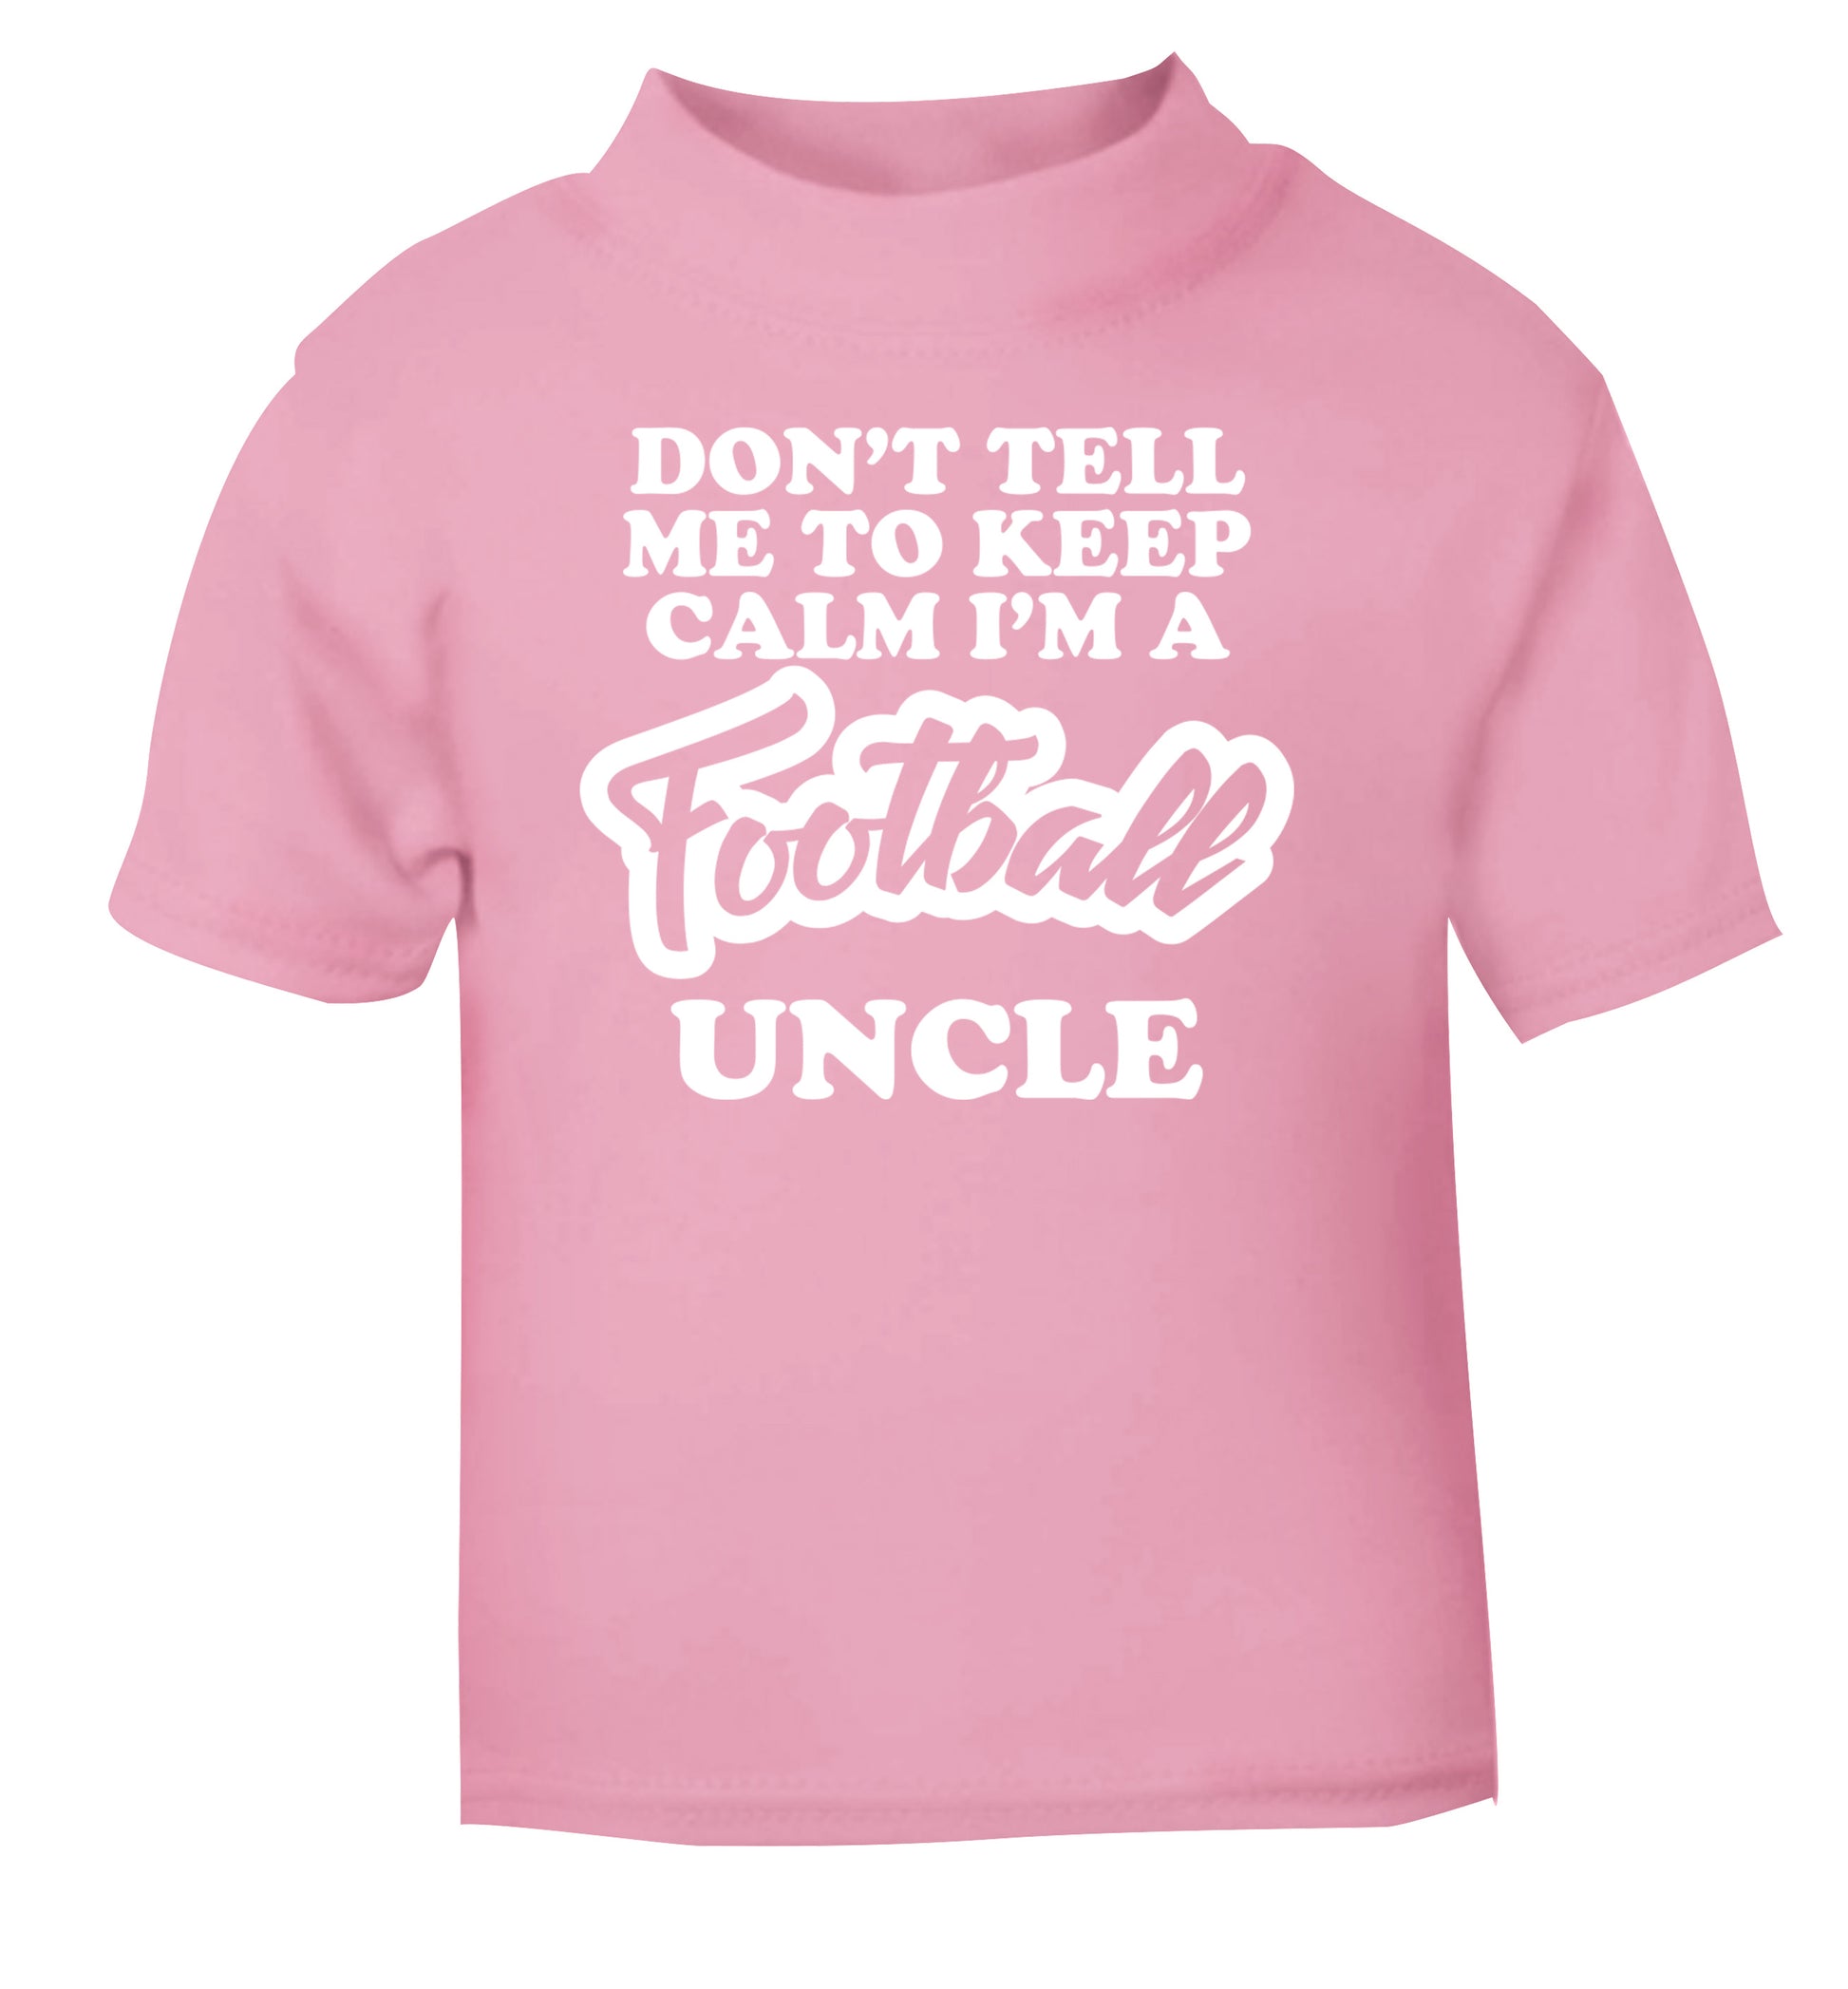 Don't tell me to keep calm I'm a football uncle light pink Baby Toddler Tshirt 2 Years